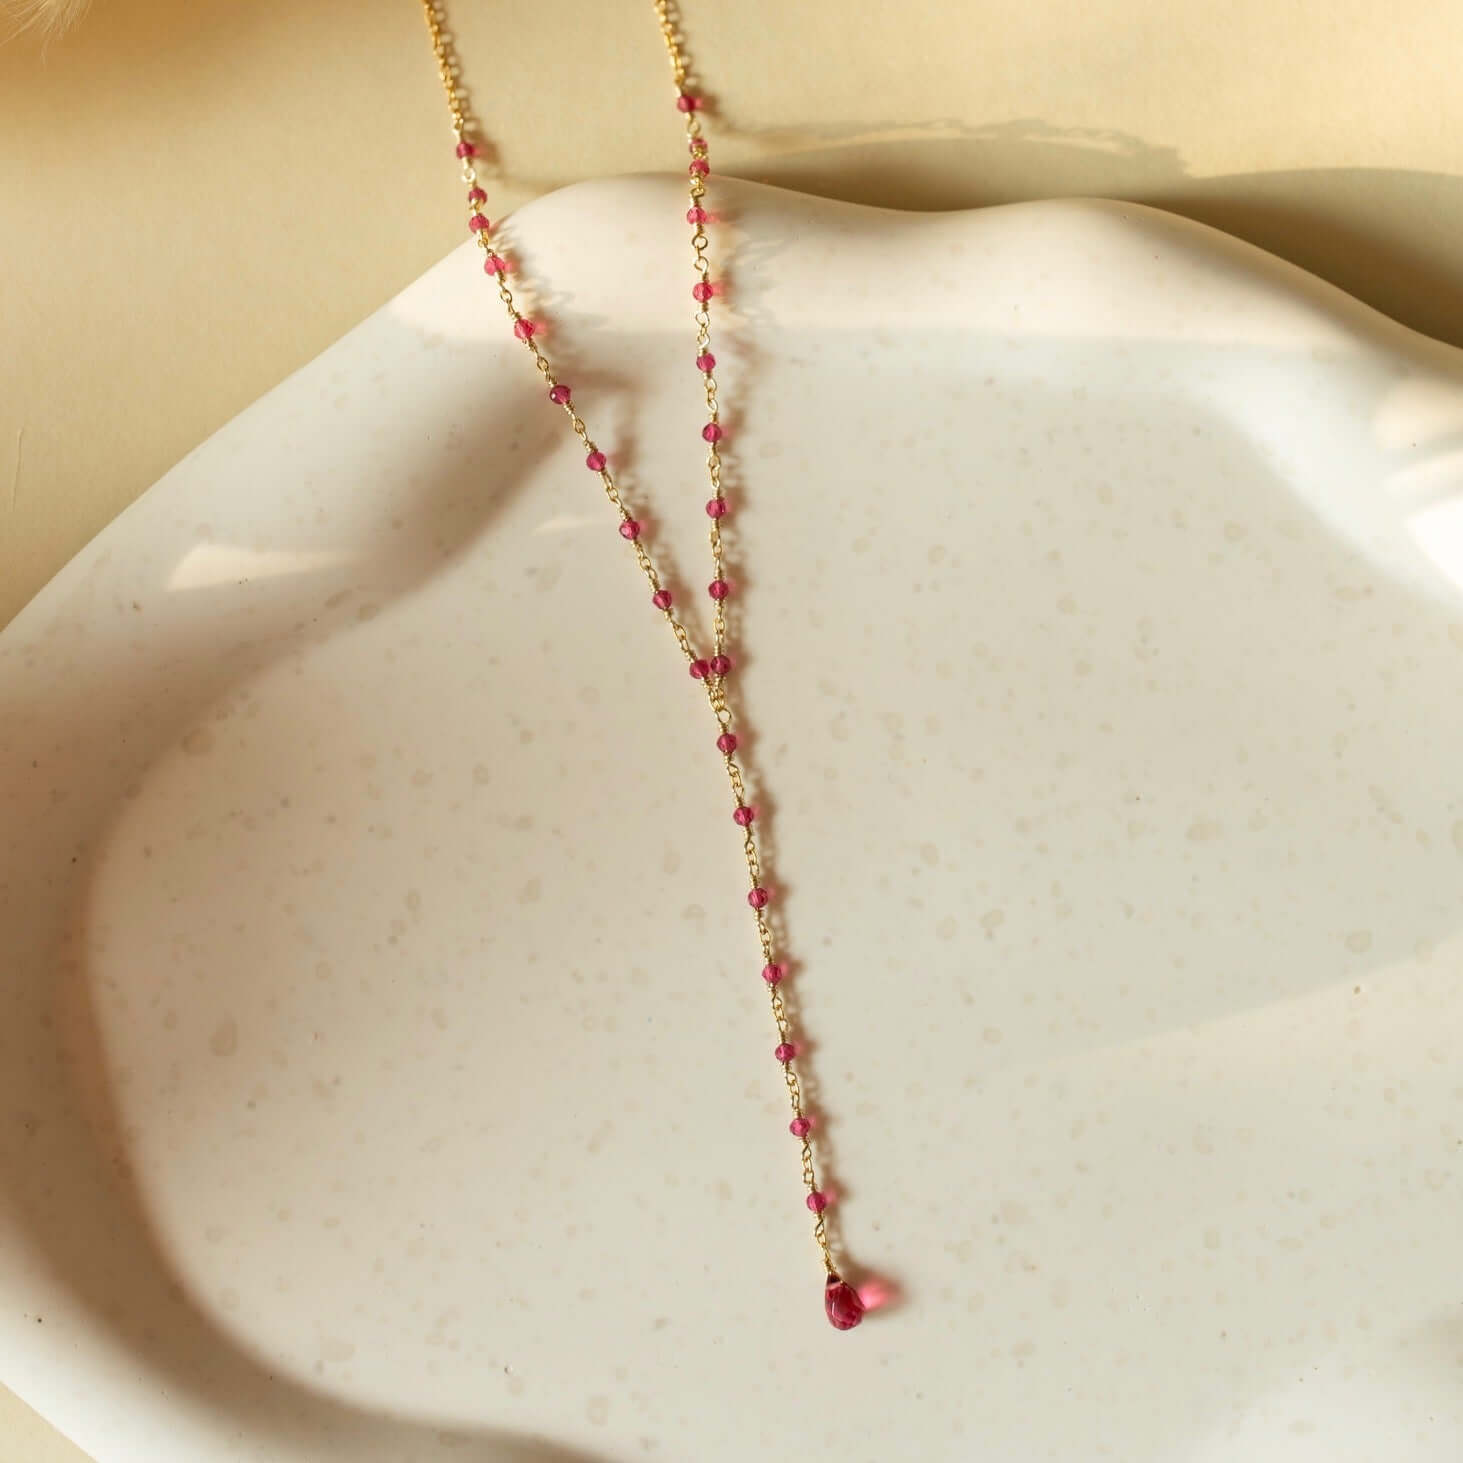 Pink tourmaline quartz lays gracefully on a rustic clay plate—a simple display of natural beauty.